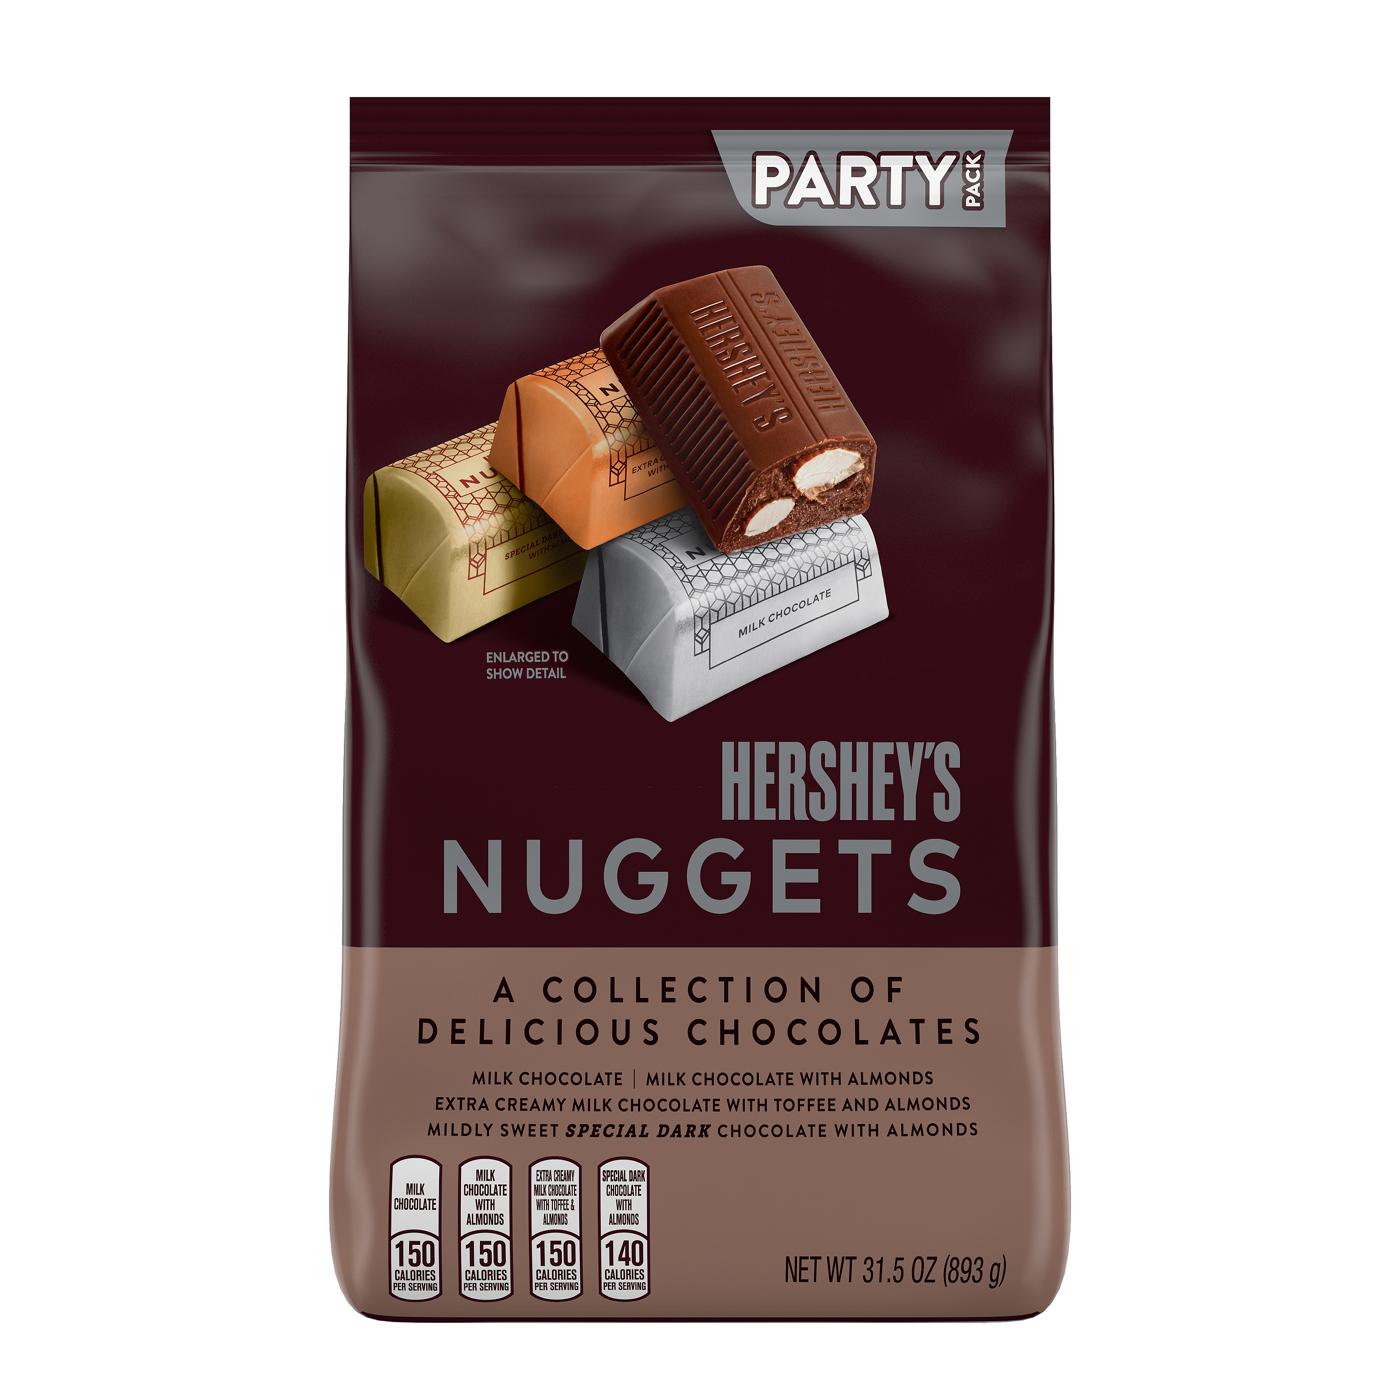 Hershey's Nuggets Assorted Chocolate Candy - Party Pack; image 1 of 3